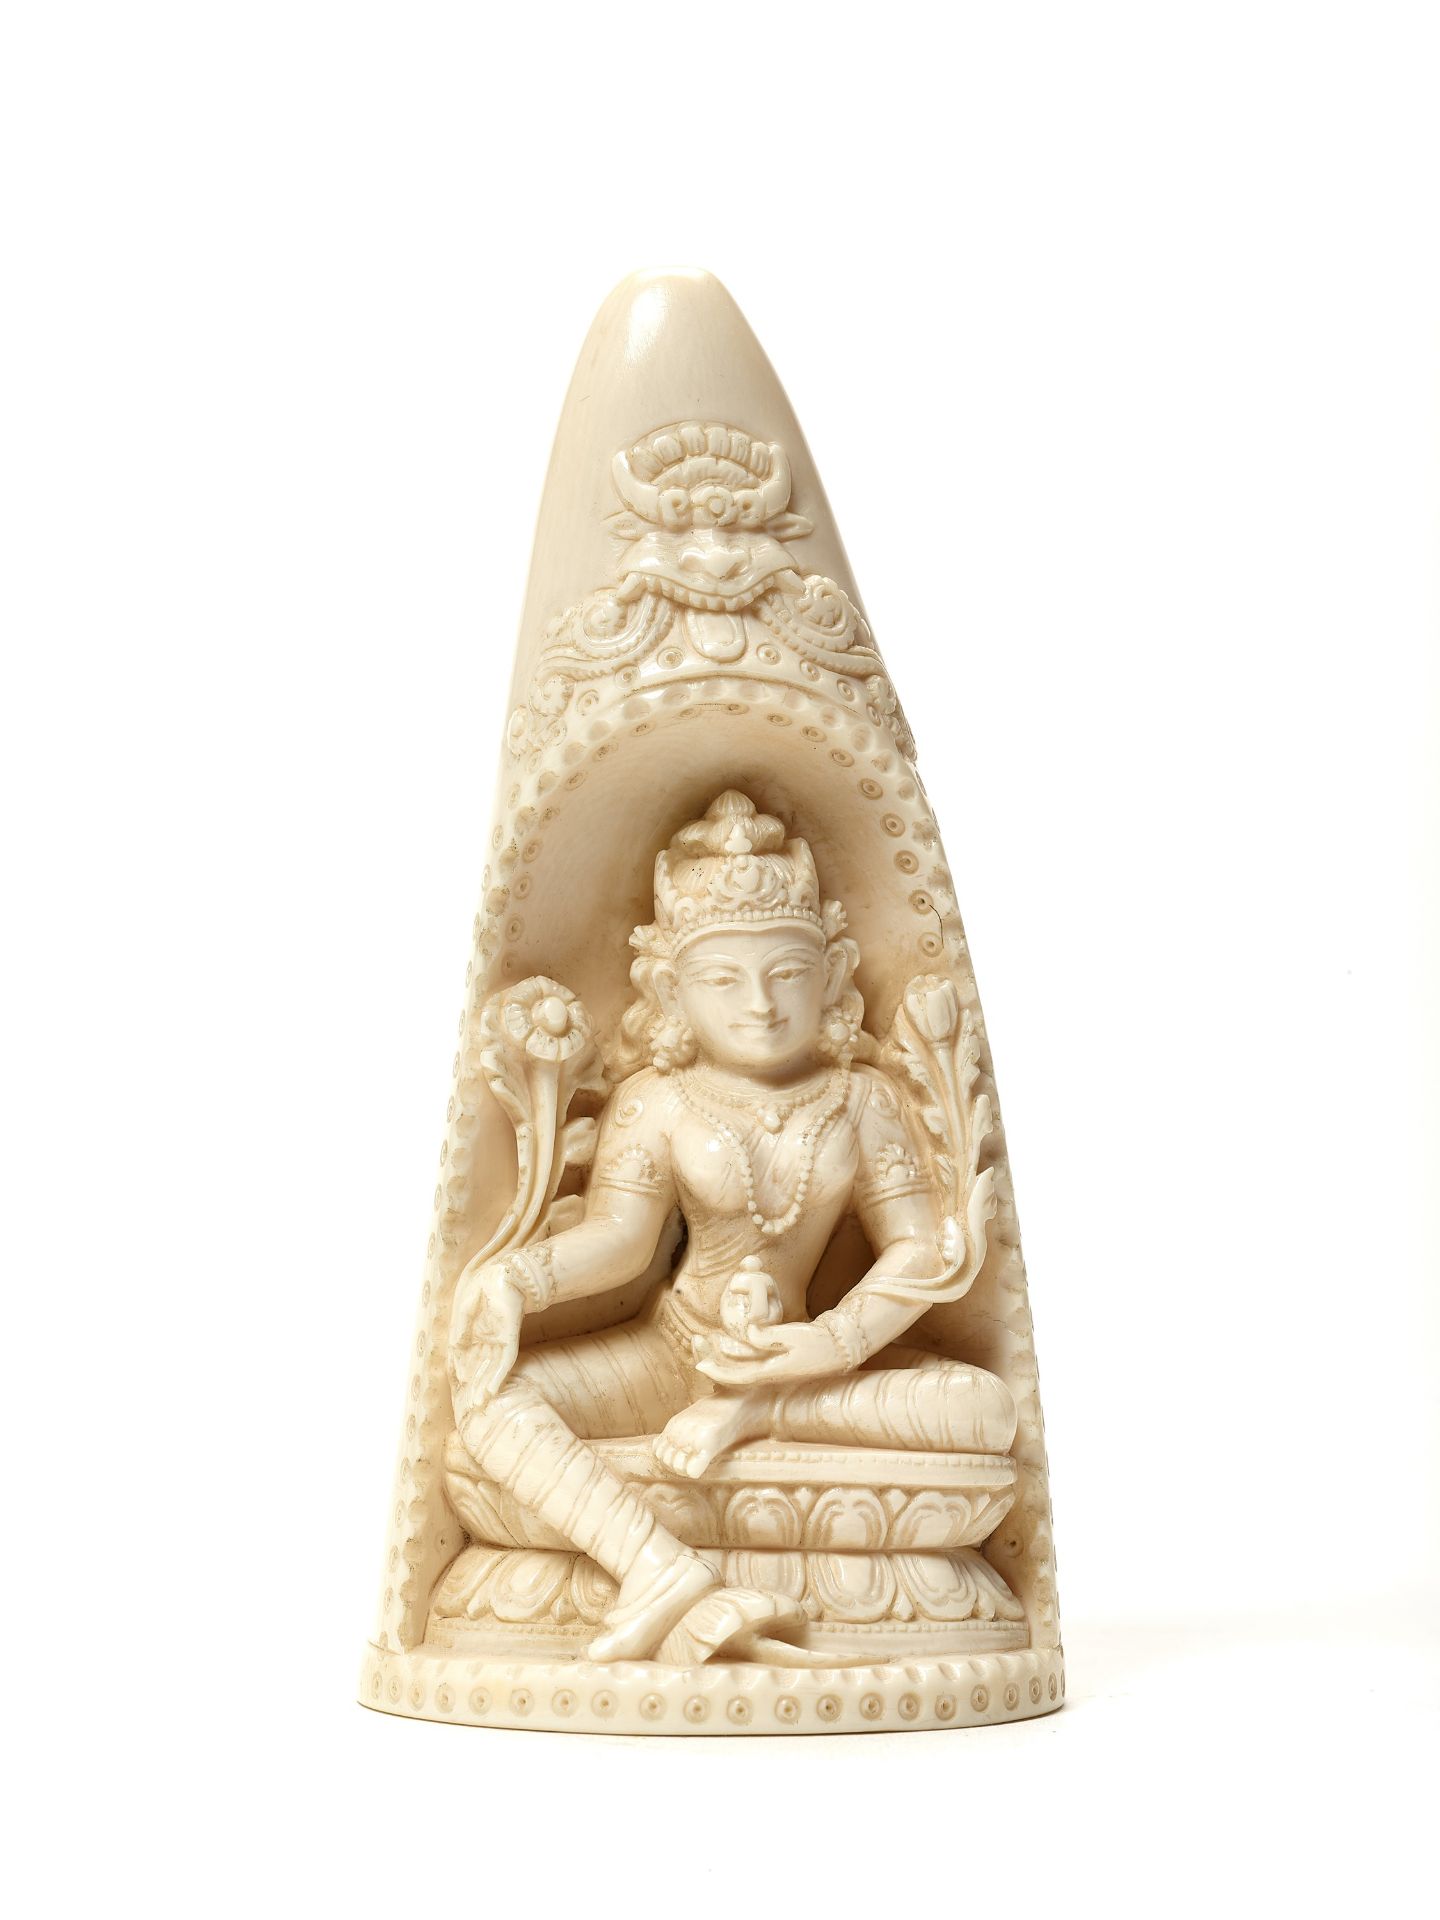 AN INDIAN IVORY TUSK CARVING OF PADMAPANI, 20TH CENTURY